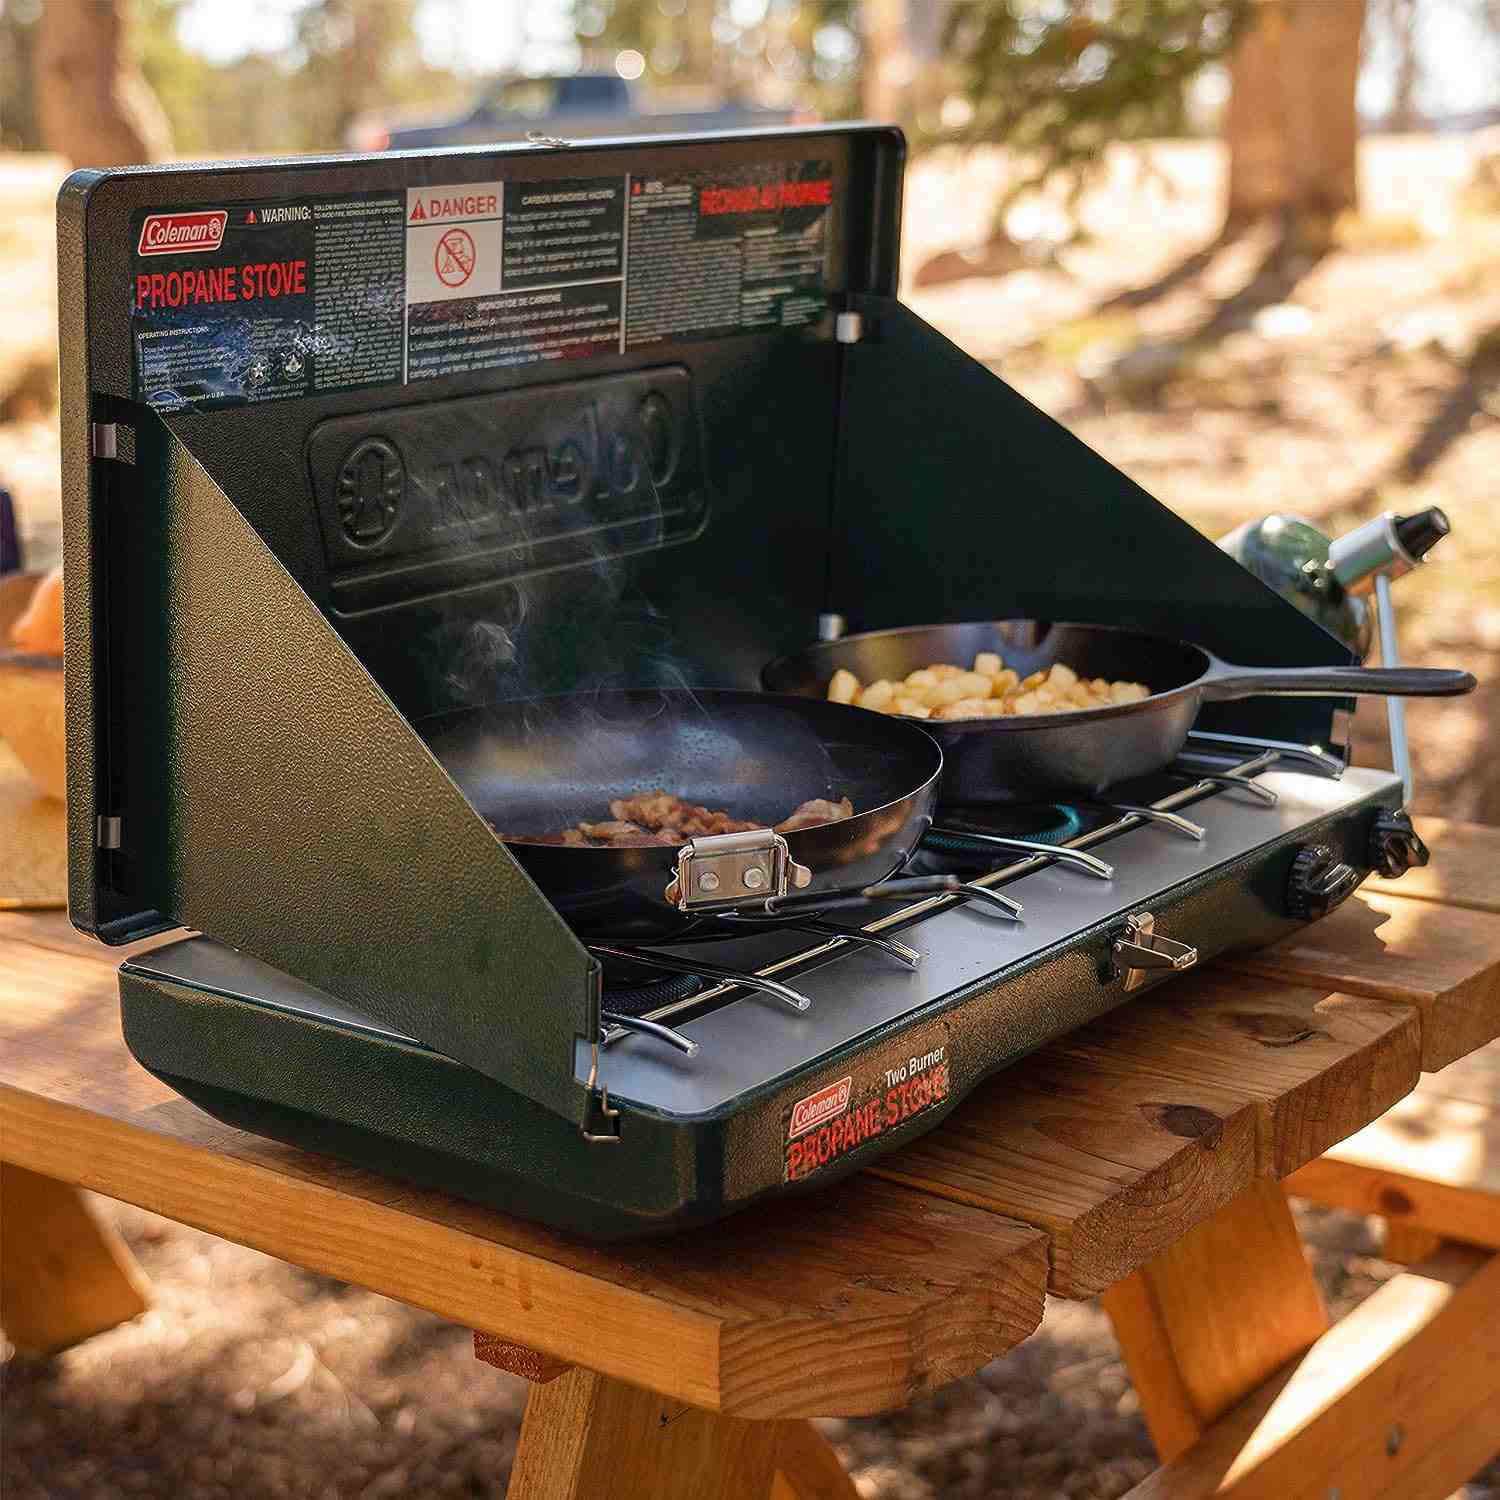 Coleman Classic Propane Stove, 2 Burner - Reliable Portable Gas Camping Stove for Outdoor Cooking, Easy-to-Use and Durable